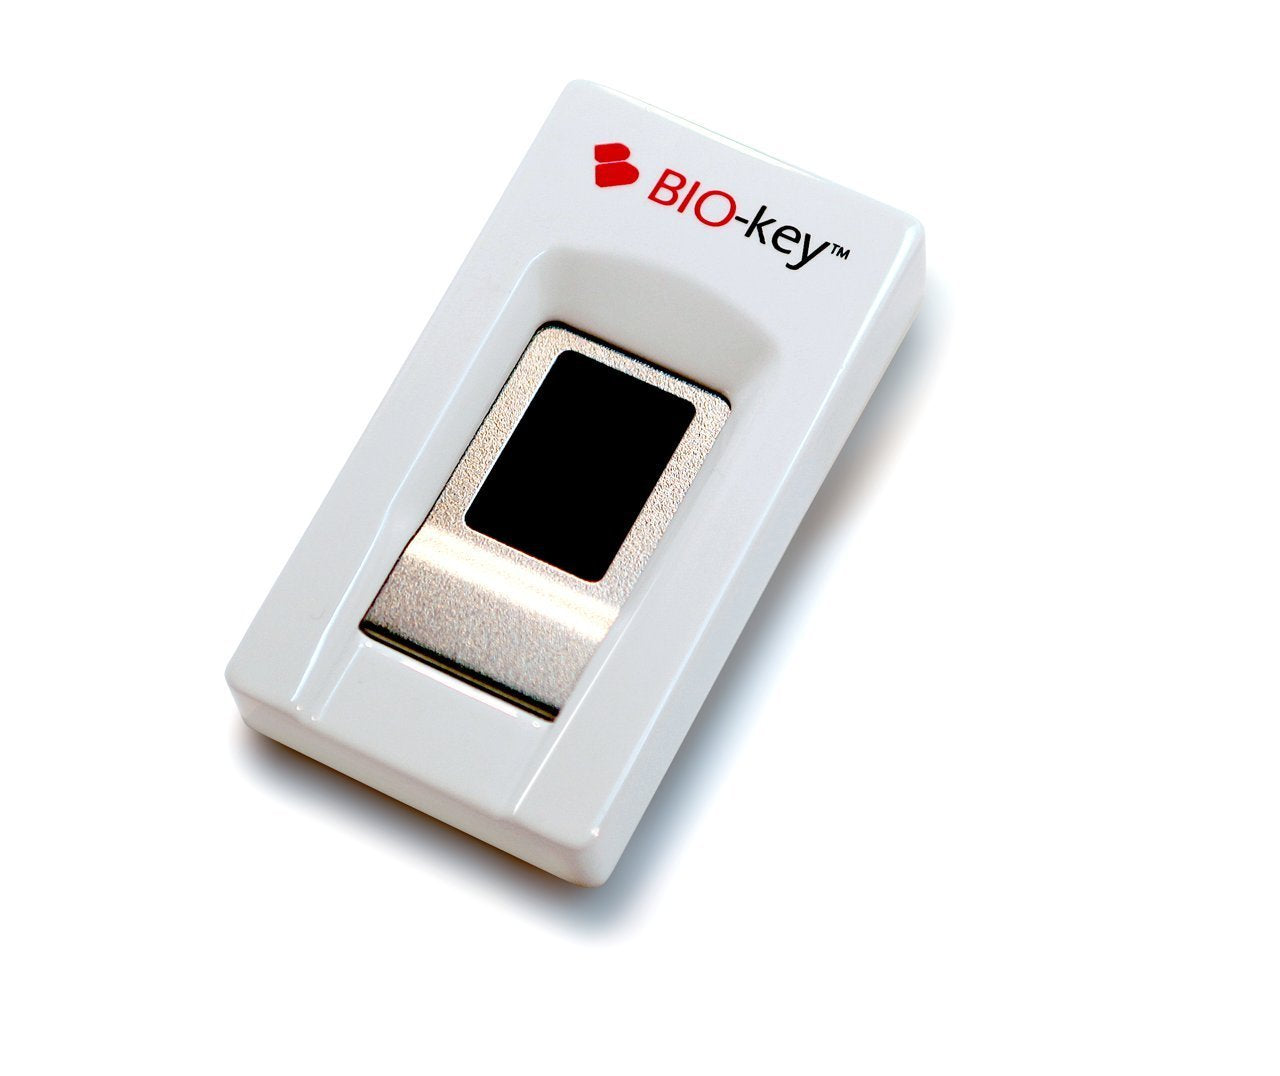 BIO-key EcoID Fingerprint Reader - Tested & Qualified by Microsoft for Windows Hello - Eliminate Passwords on Windows 7/8.1/10 - Includes OmniPass Online Password Vault with Purchase